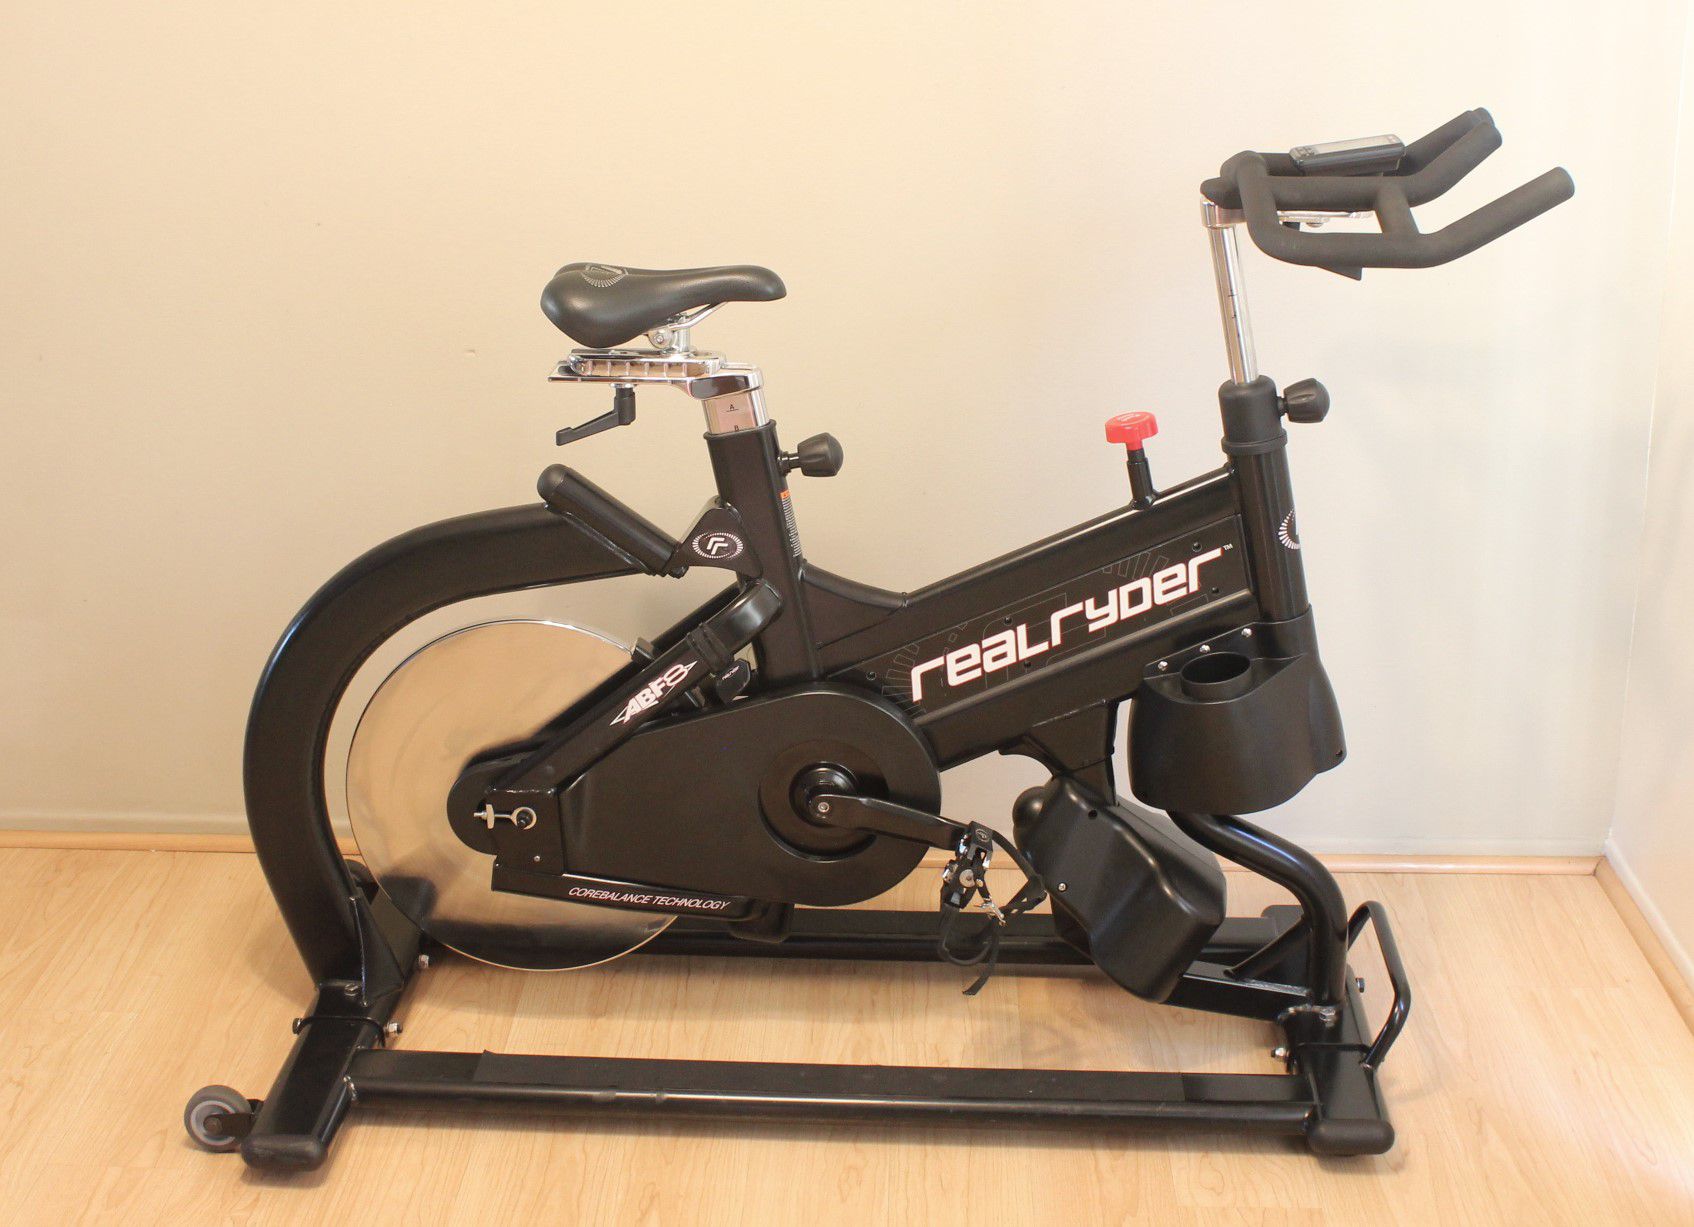 RealRyder ABF8 Commercial Grade Spin Bike Cycle Trainer Exercise Bicycle Workout Stationary Cycling